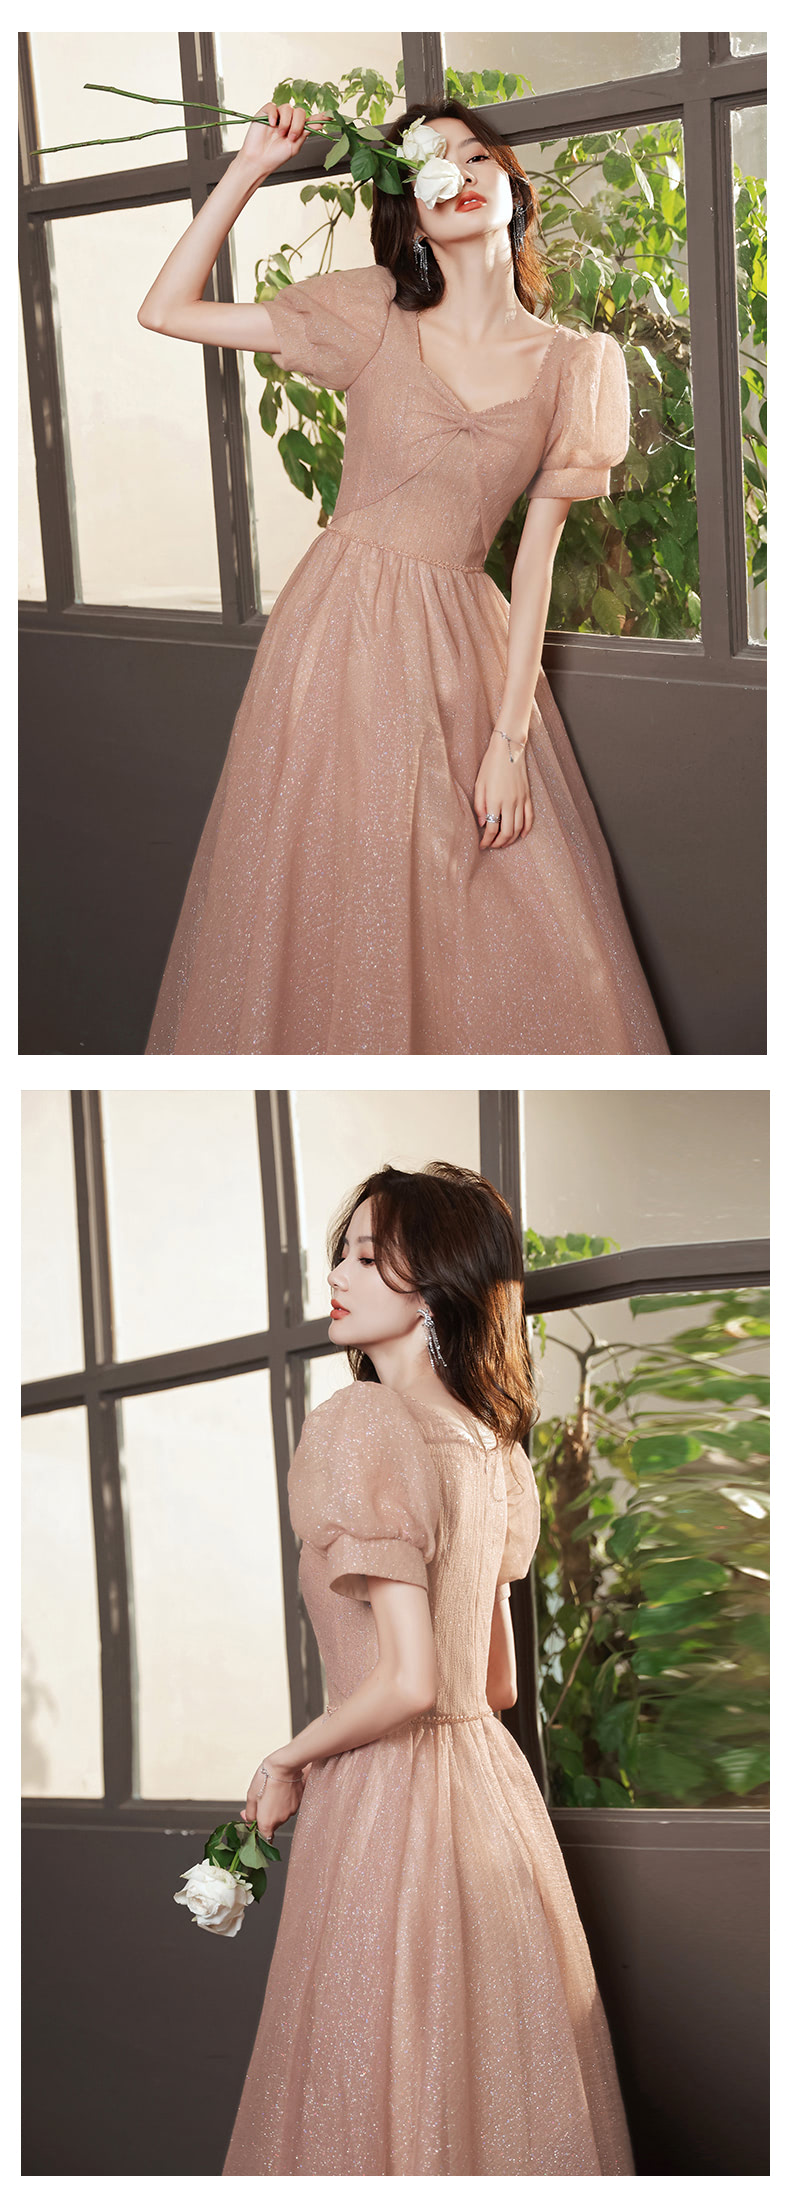 Simple-Pink-Homecoming-Evening-Forma-Party-Prom-Long-Dress14.jpg